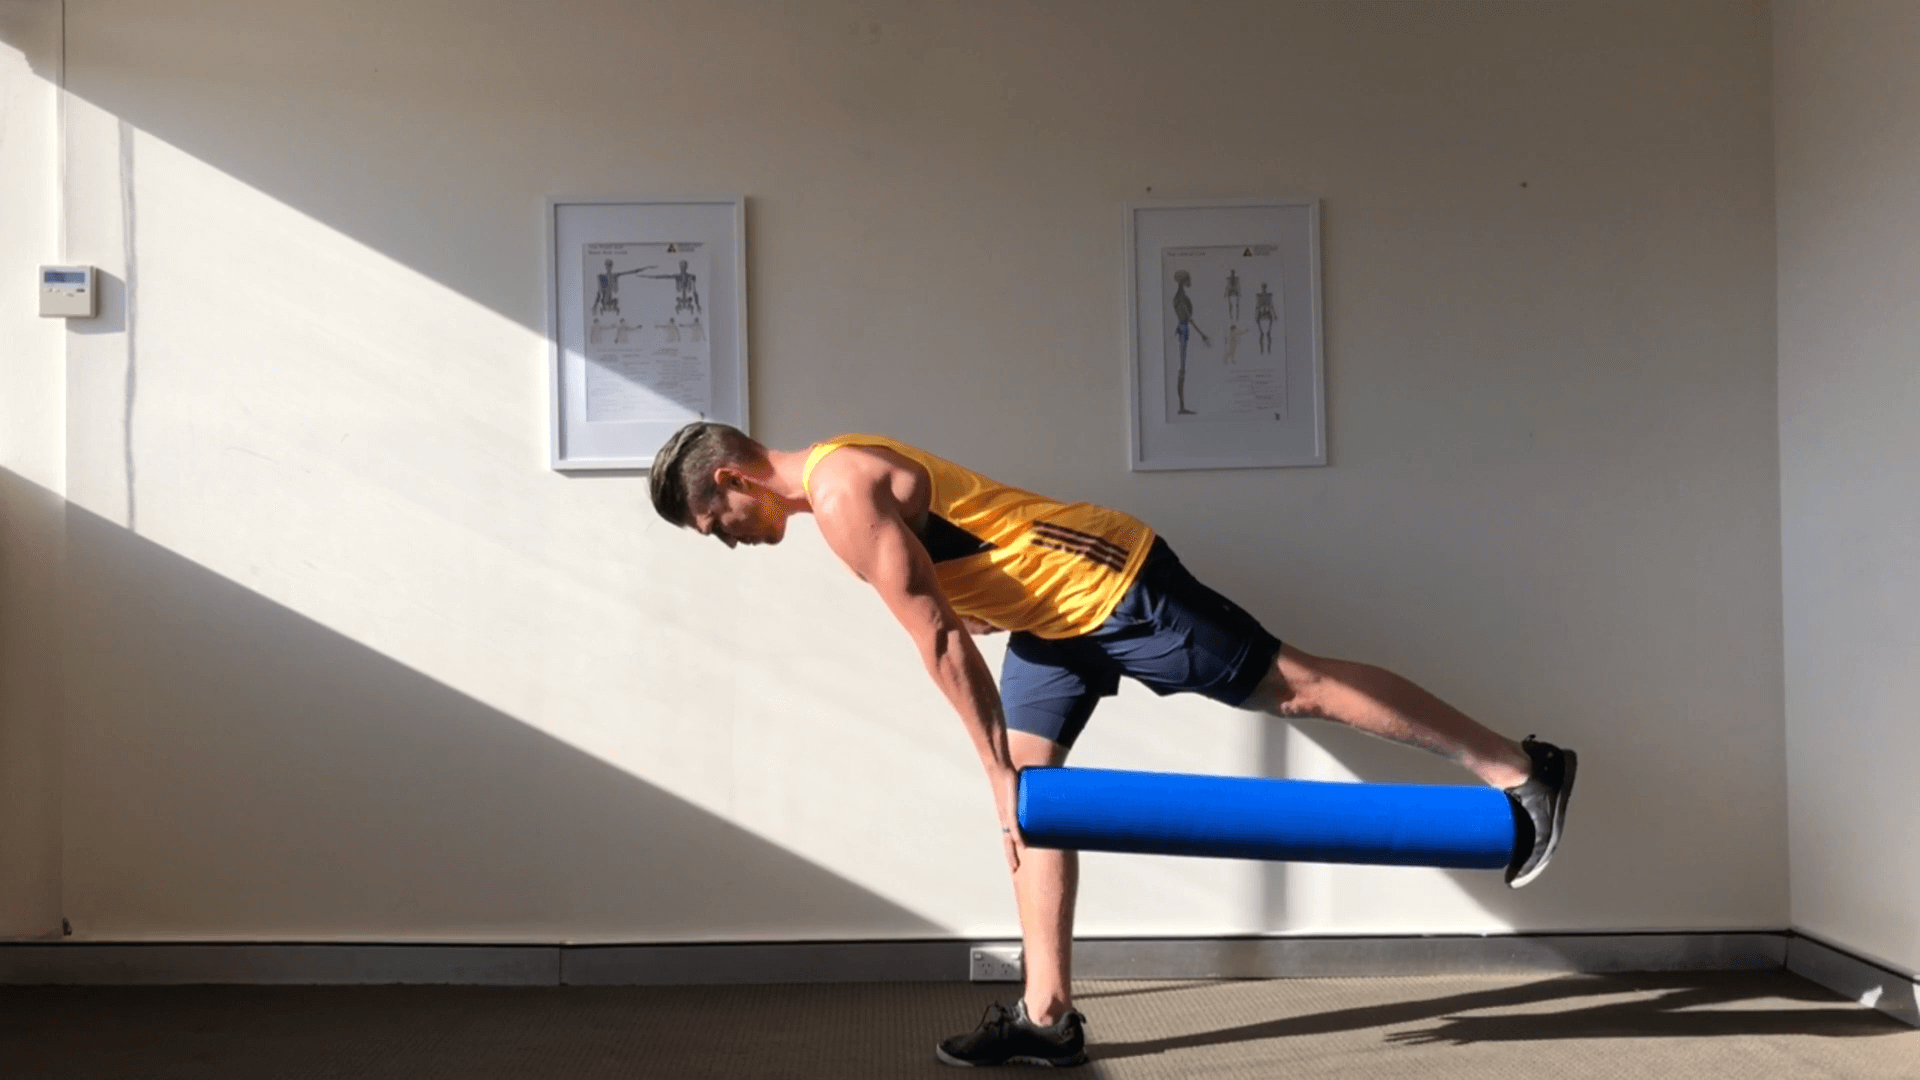 Work on your mobility with these foam roller exercises from your brookvale chiropractor